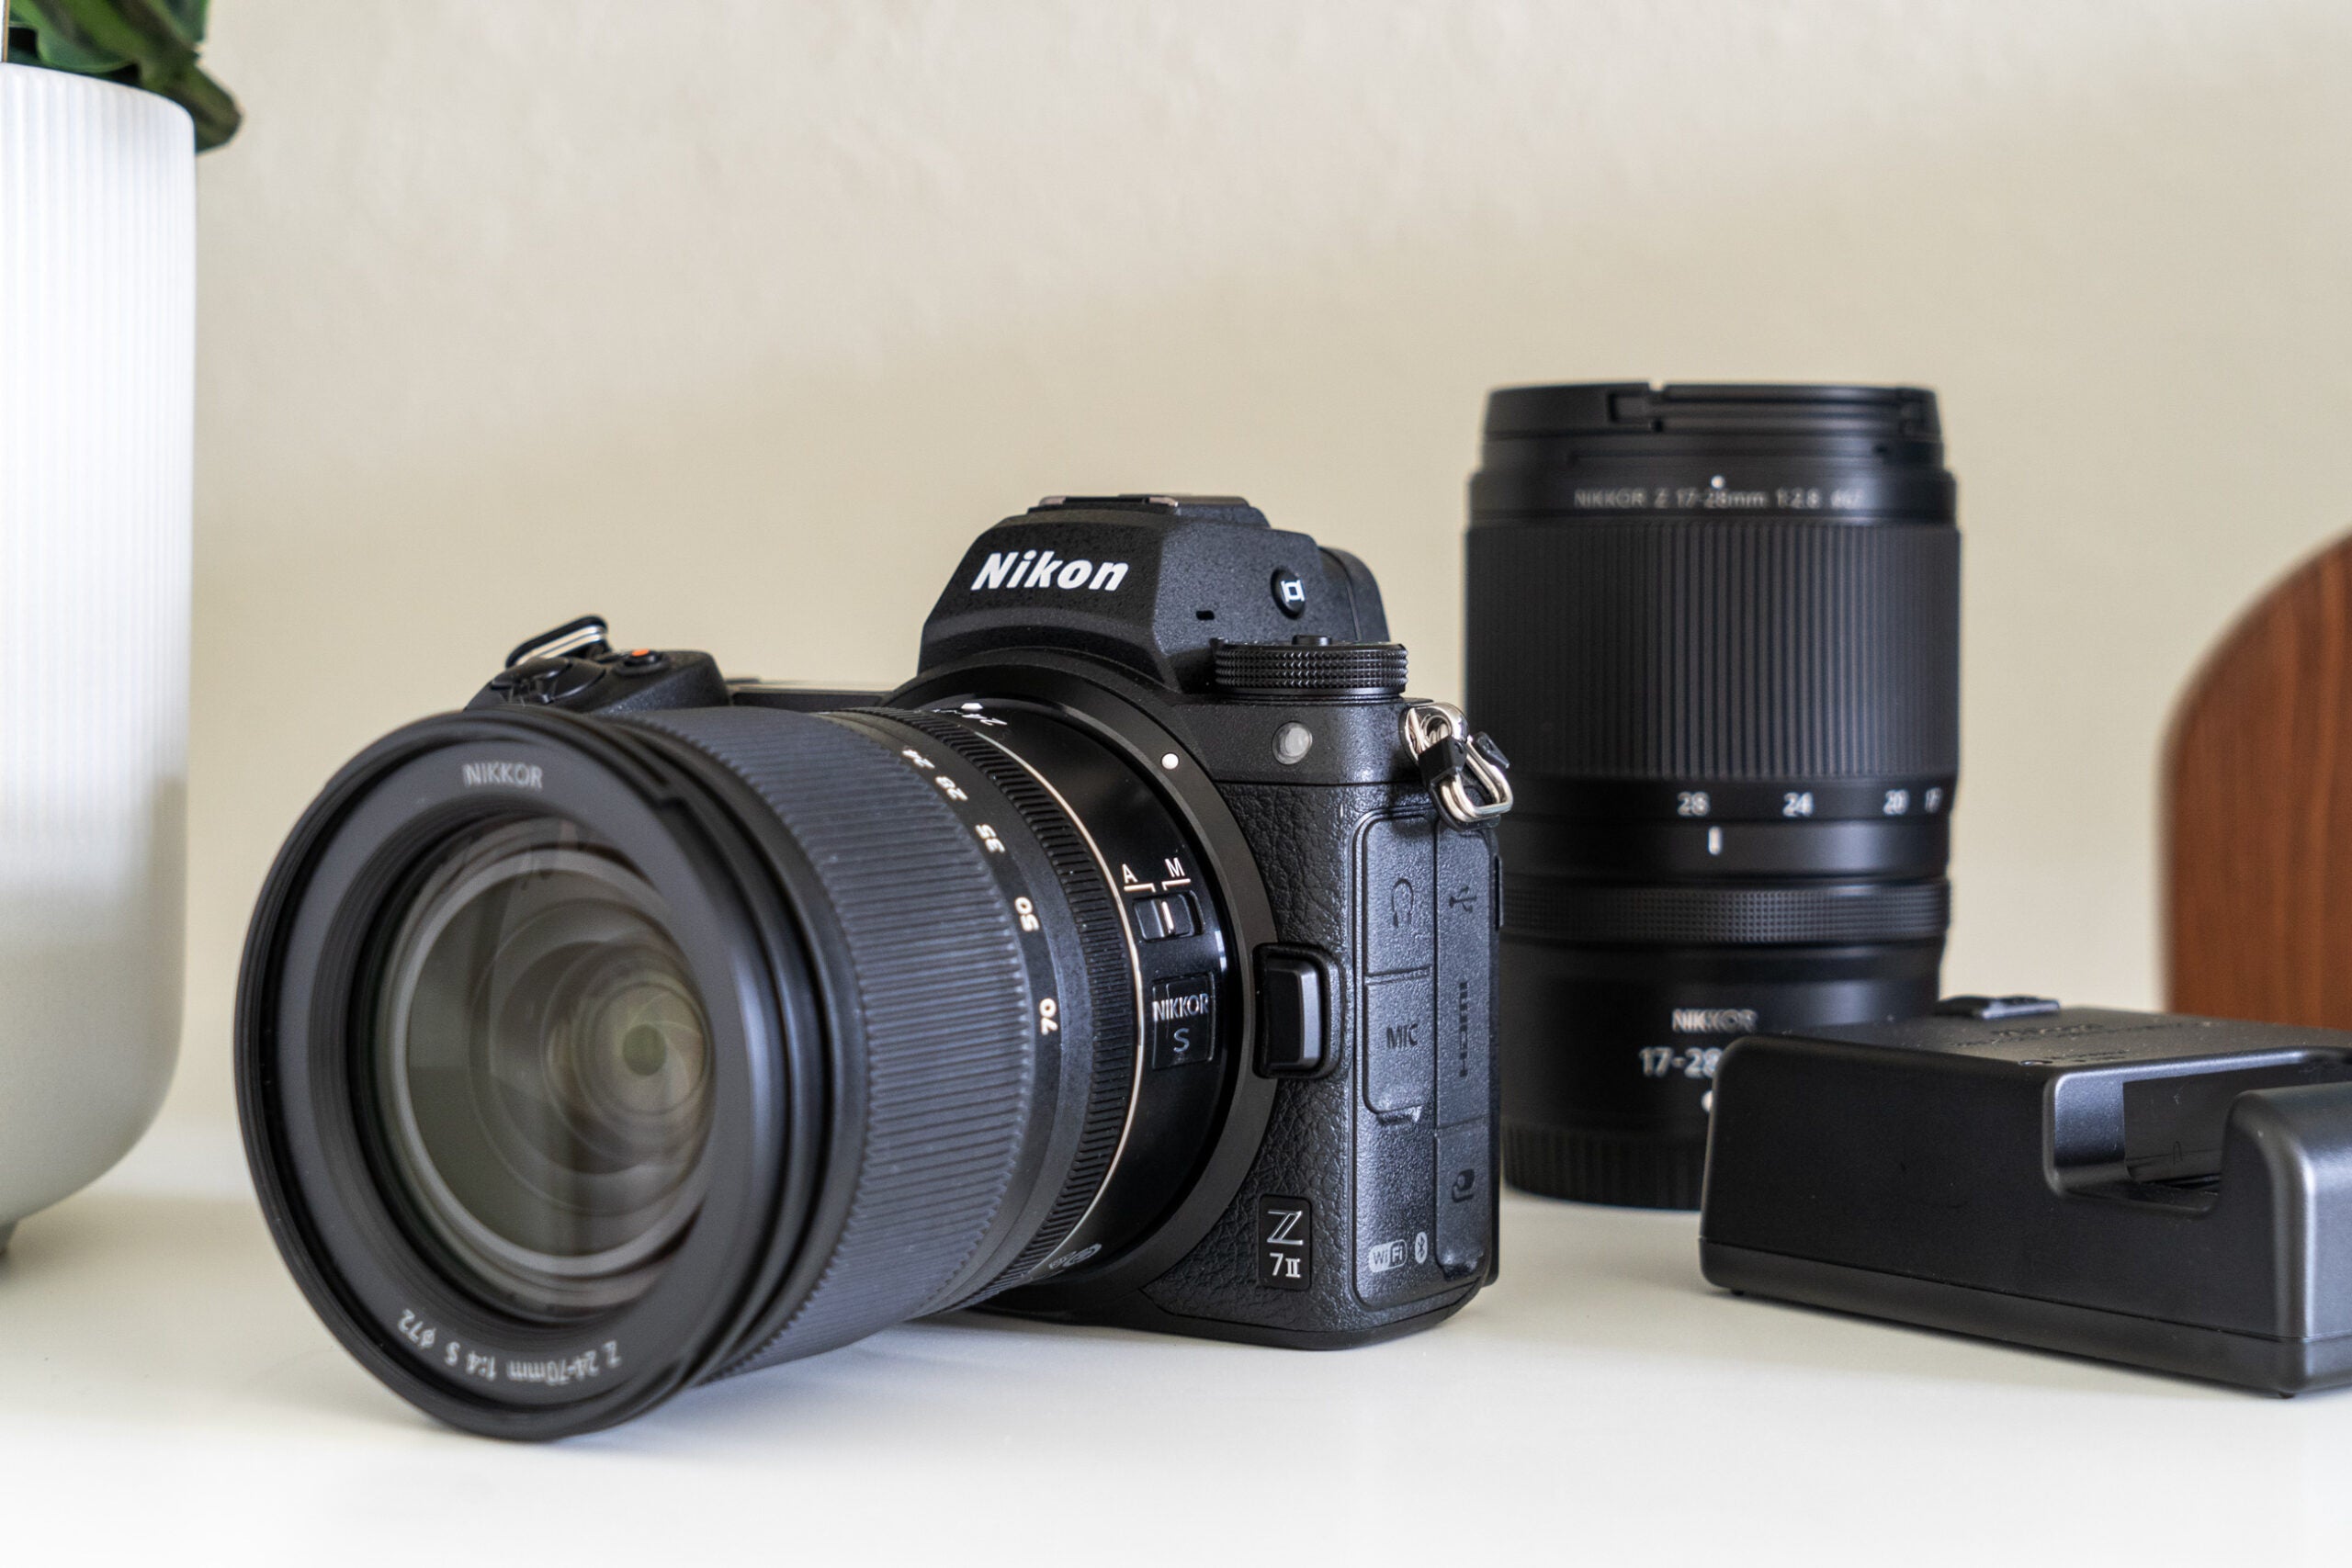 Nikon Z7 II mirrorless camera with lenses and battery charger.